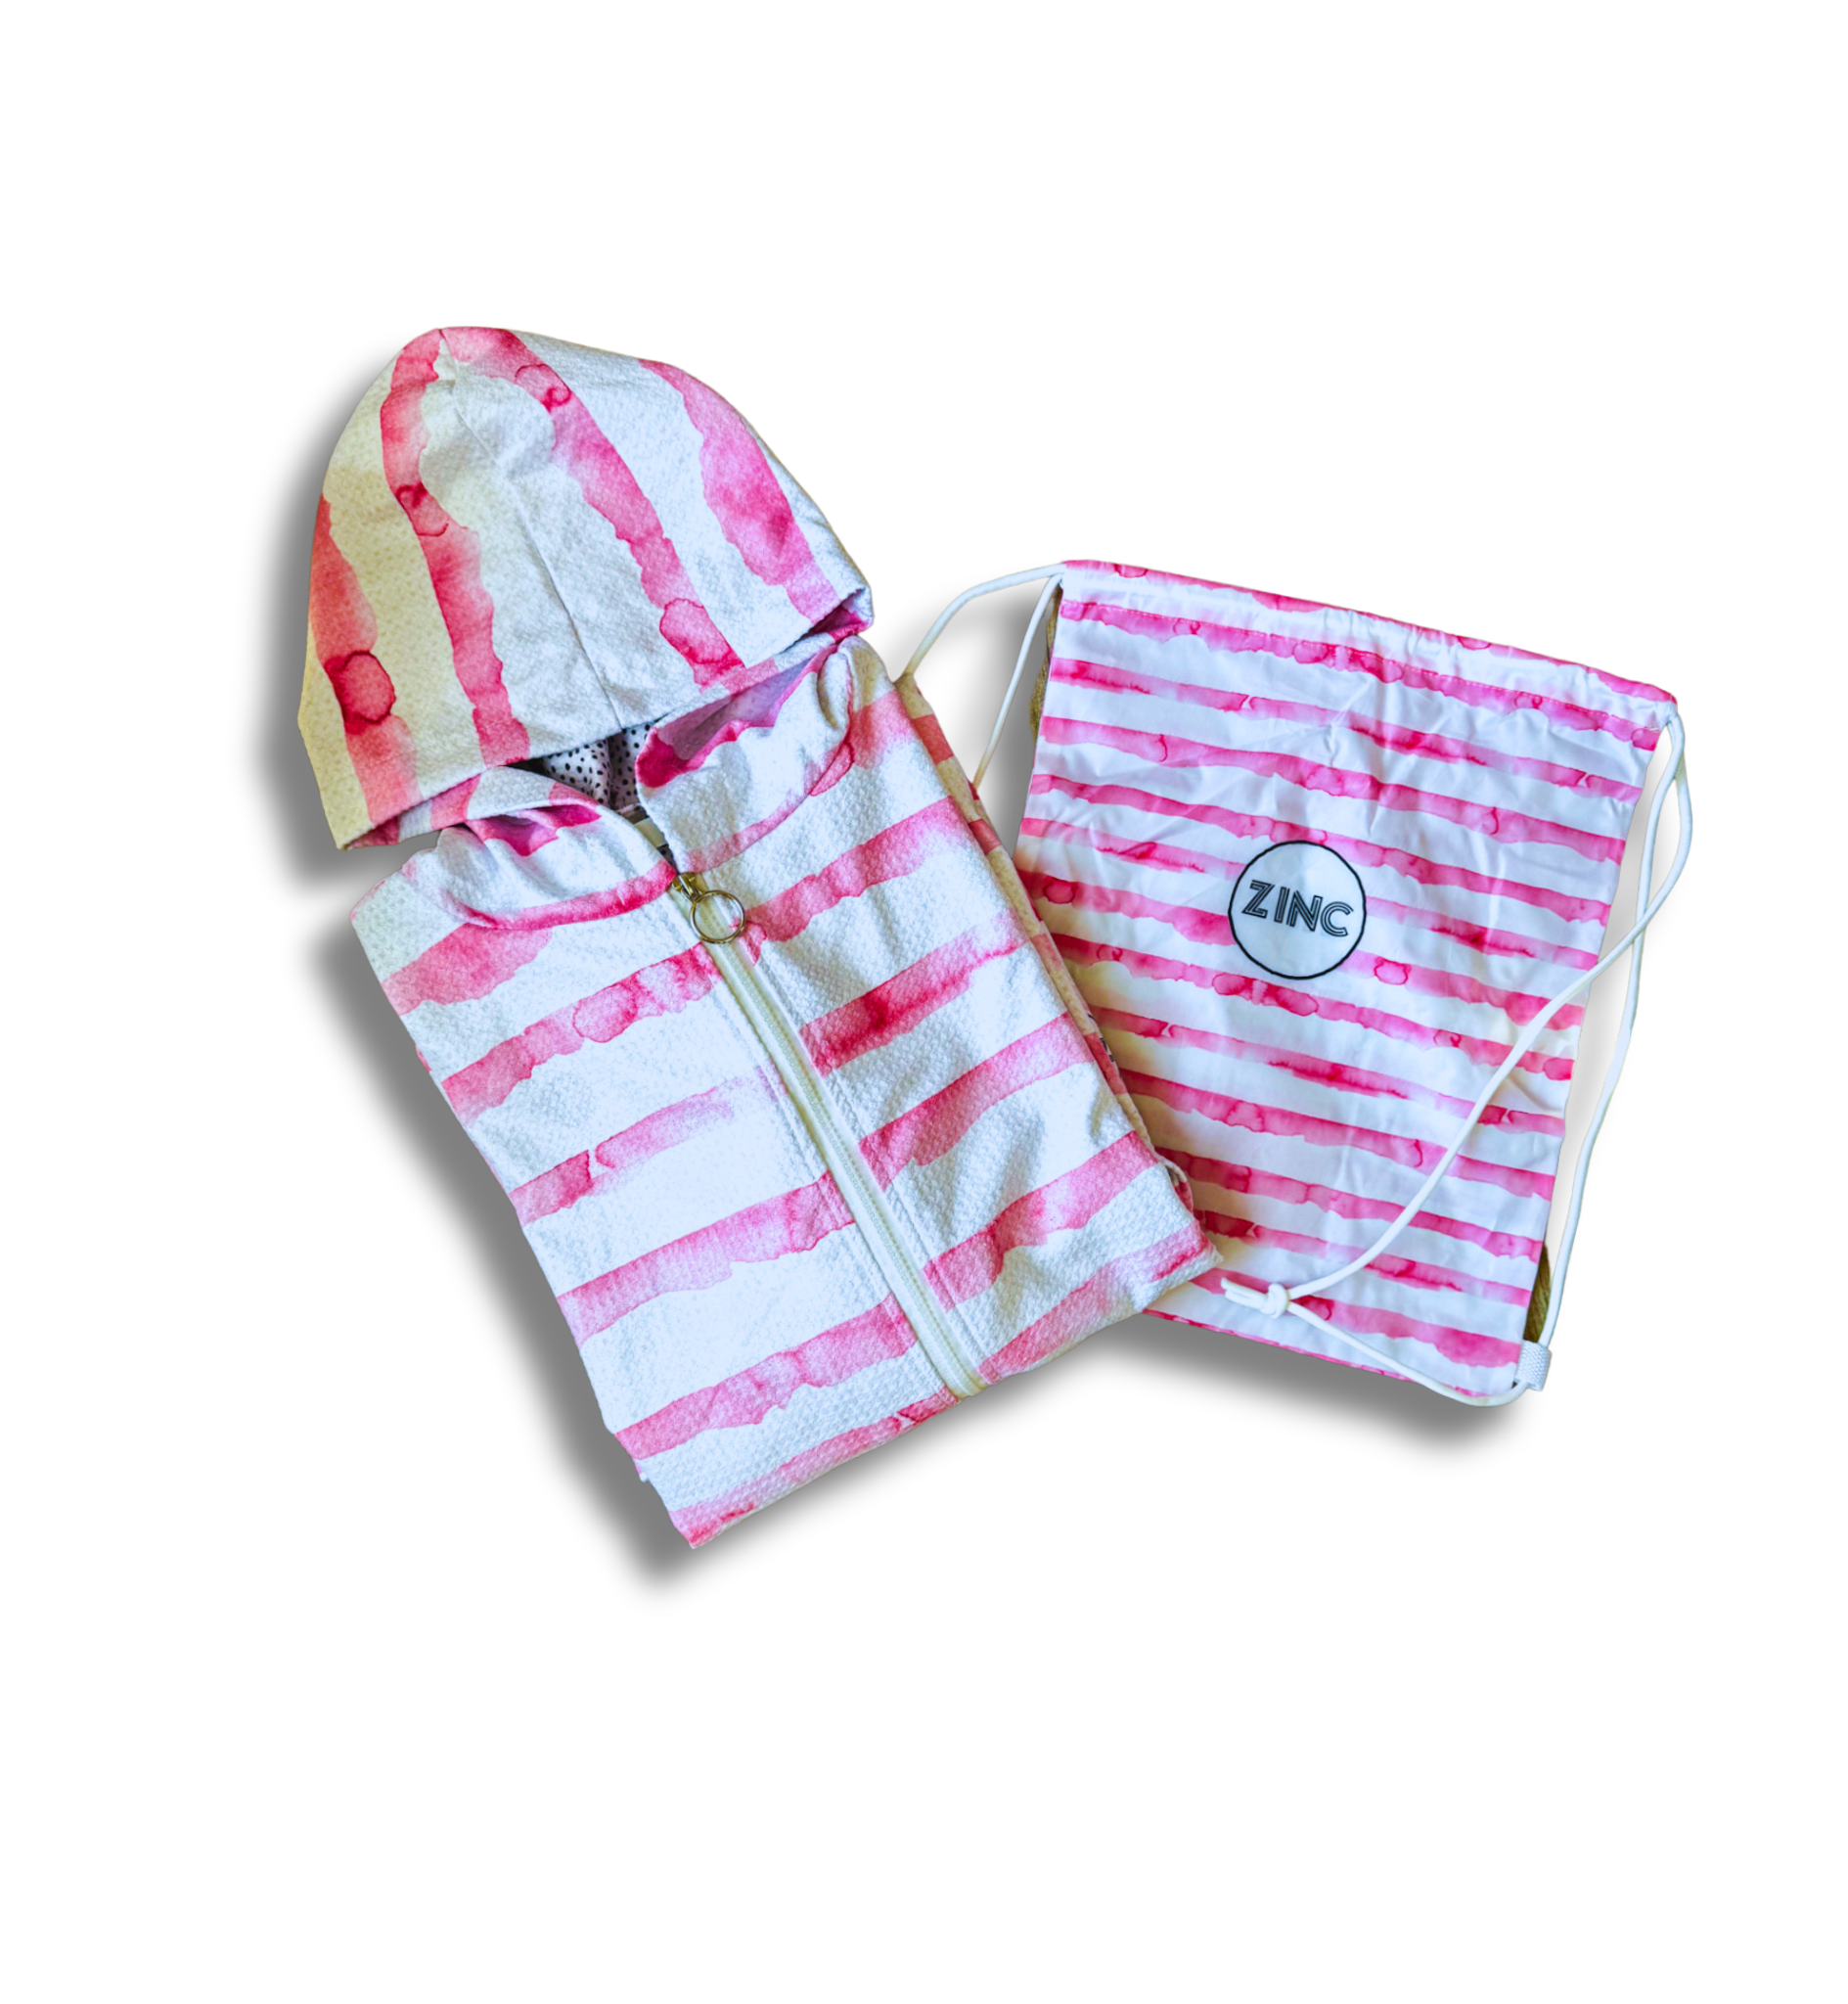 XL ZIP UP Hooded Towel - French Beach Pink *PRE-ORDER DUE END MAY/JUNE*